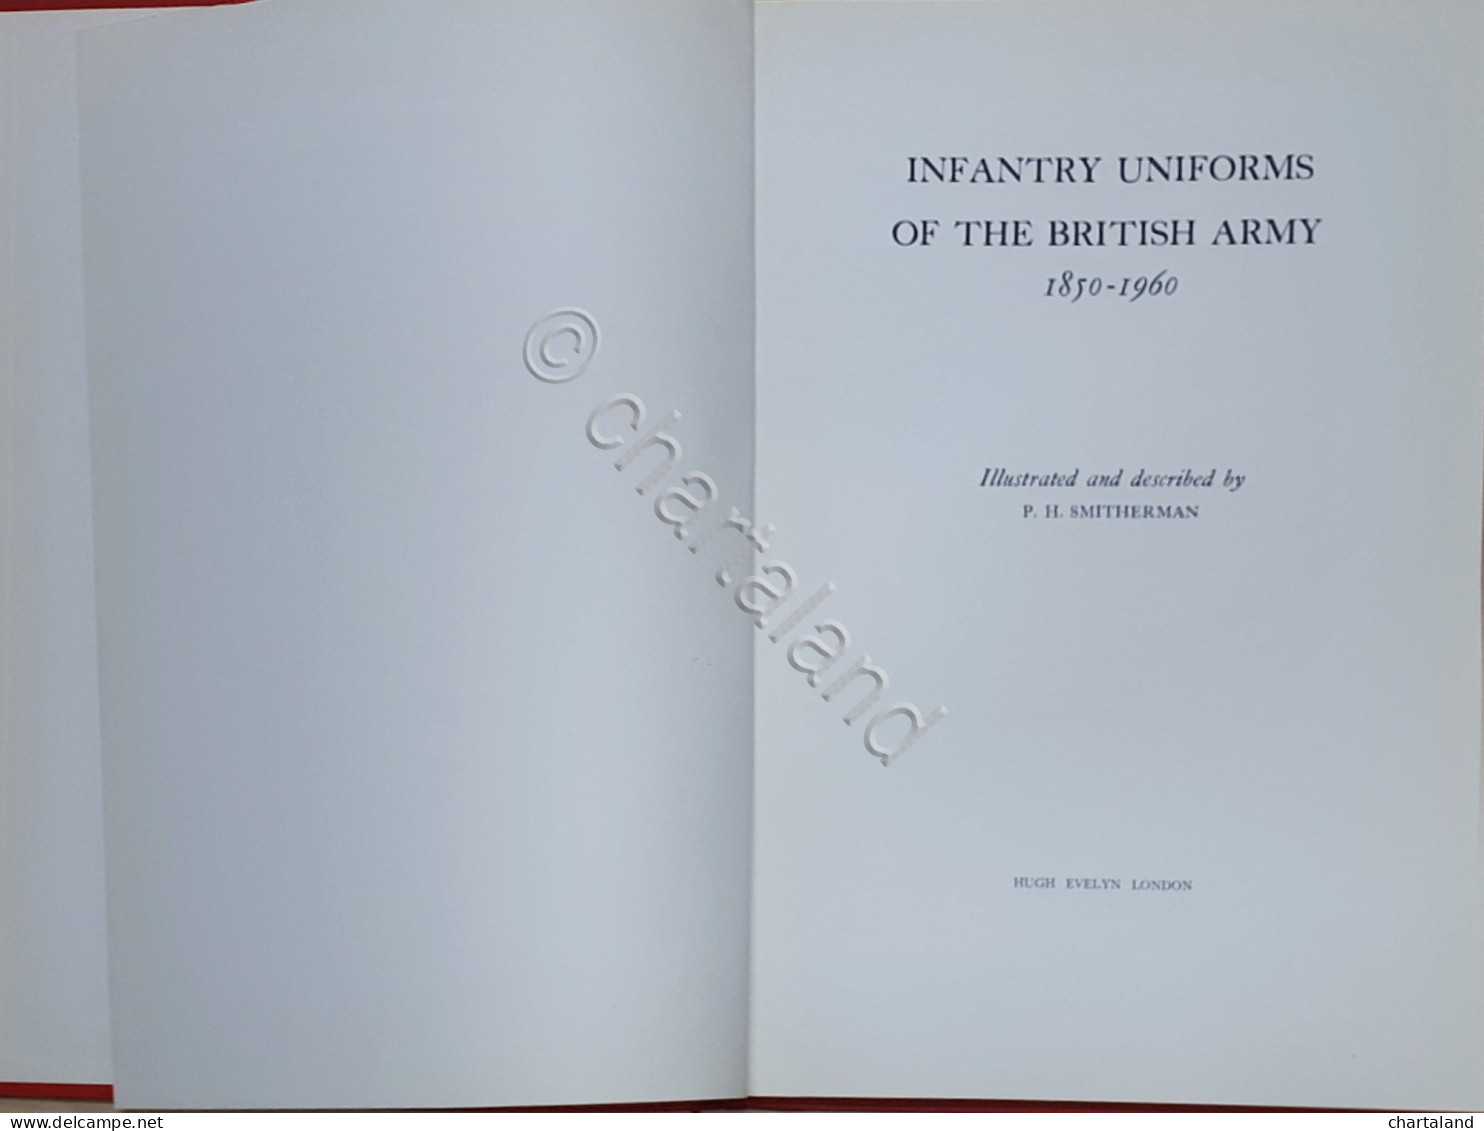 Smitherman - Infantry uniforms of the British army - Opera completa 1965-70